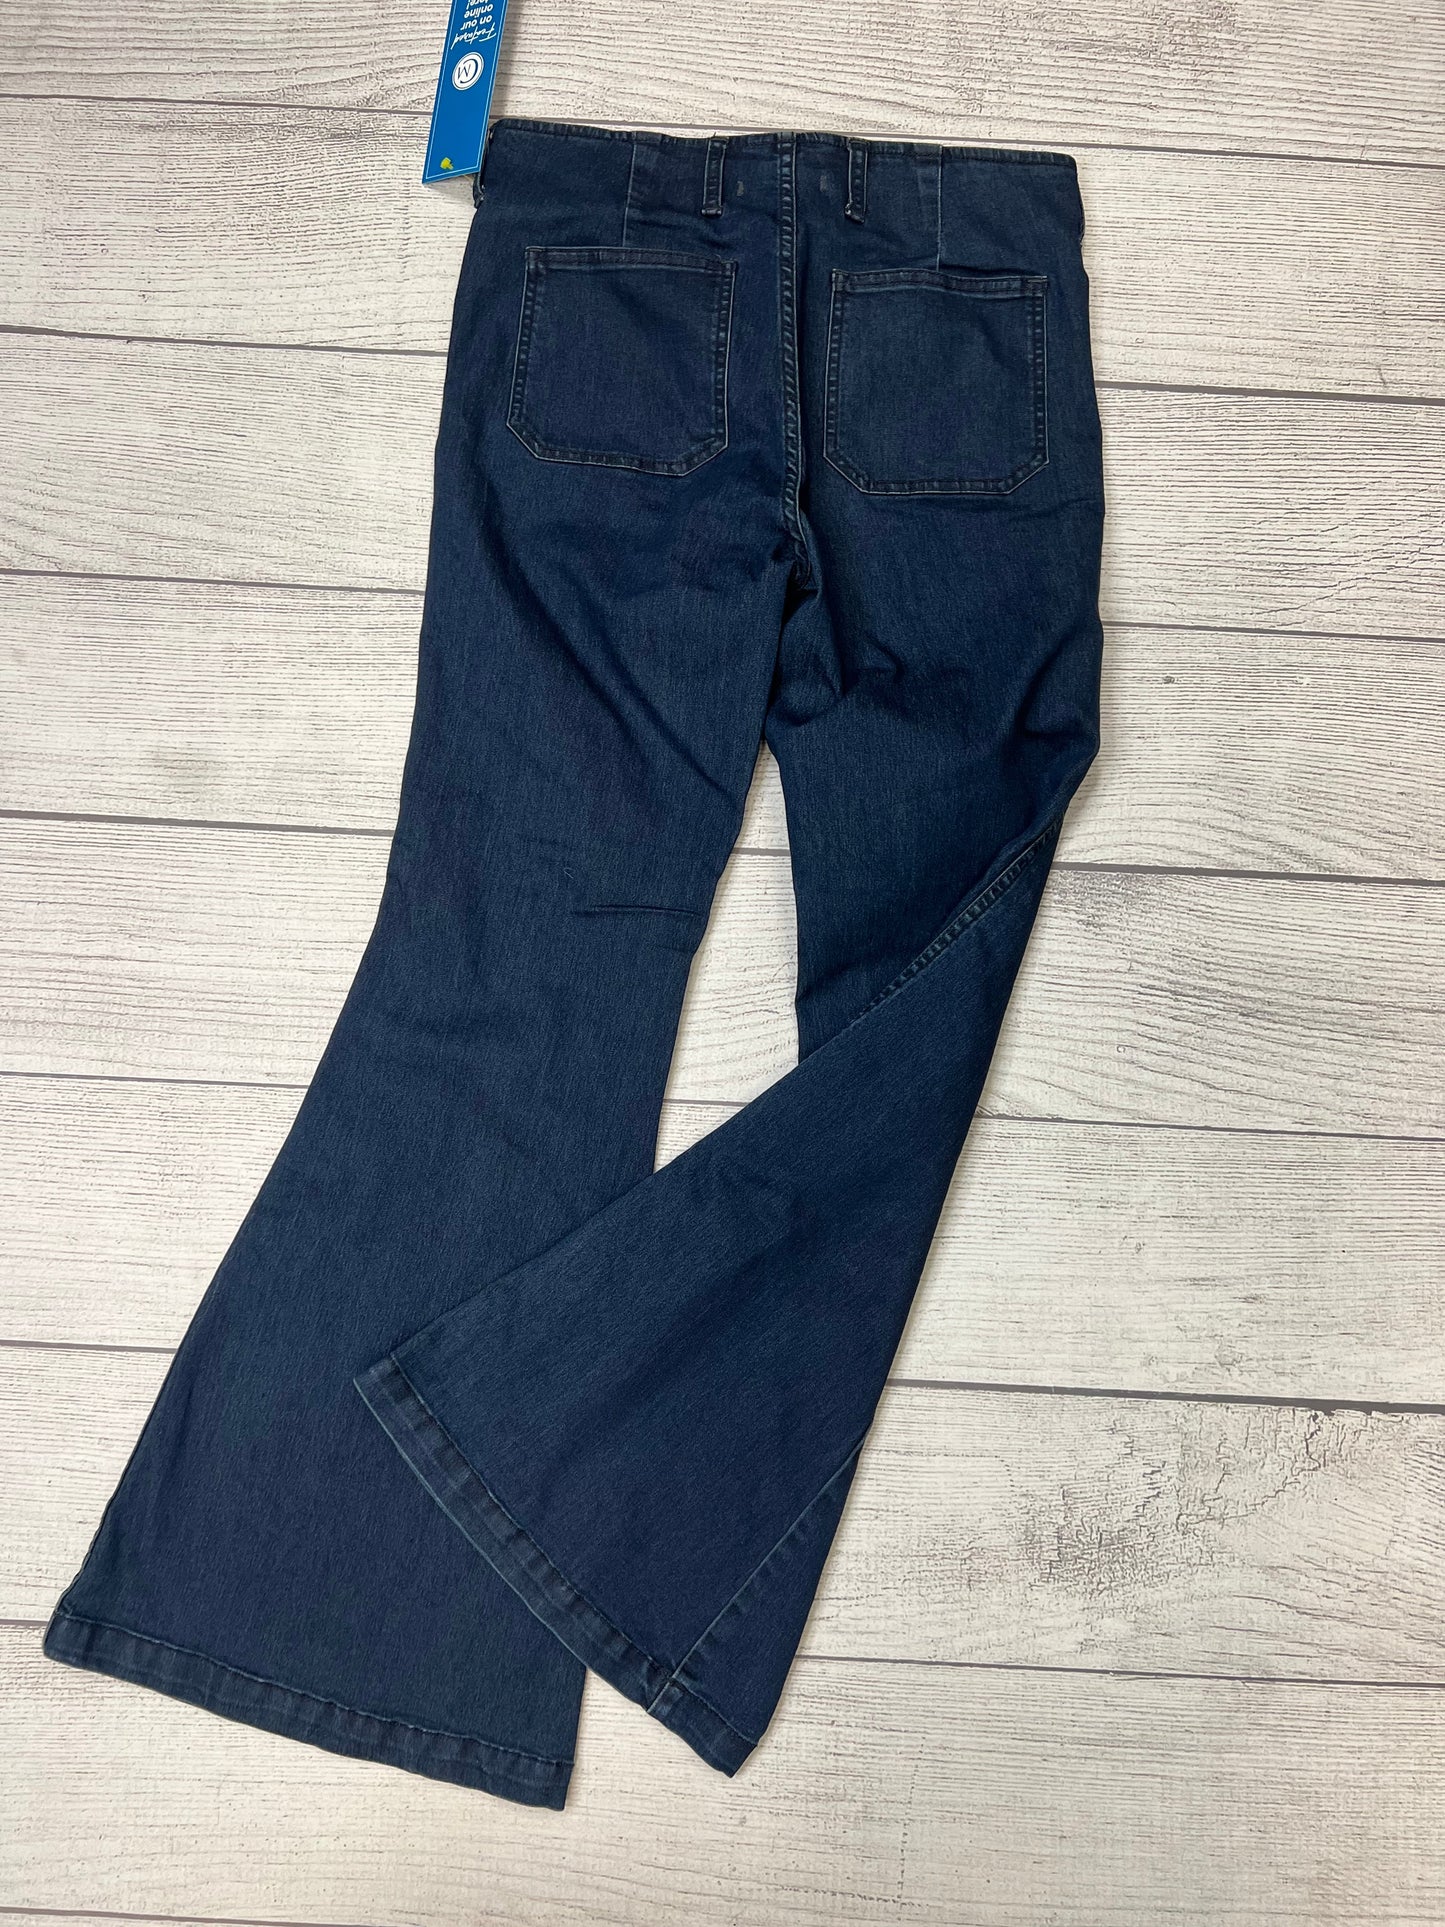 Blue Jeans Flared Free People, Size 10